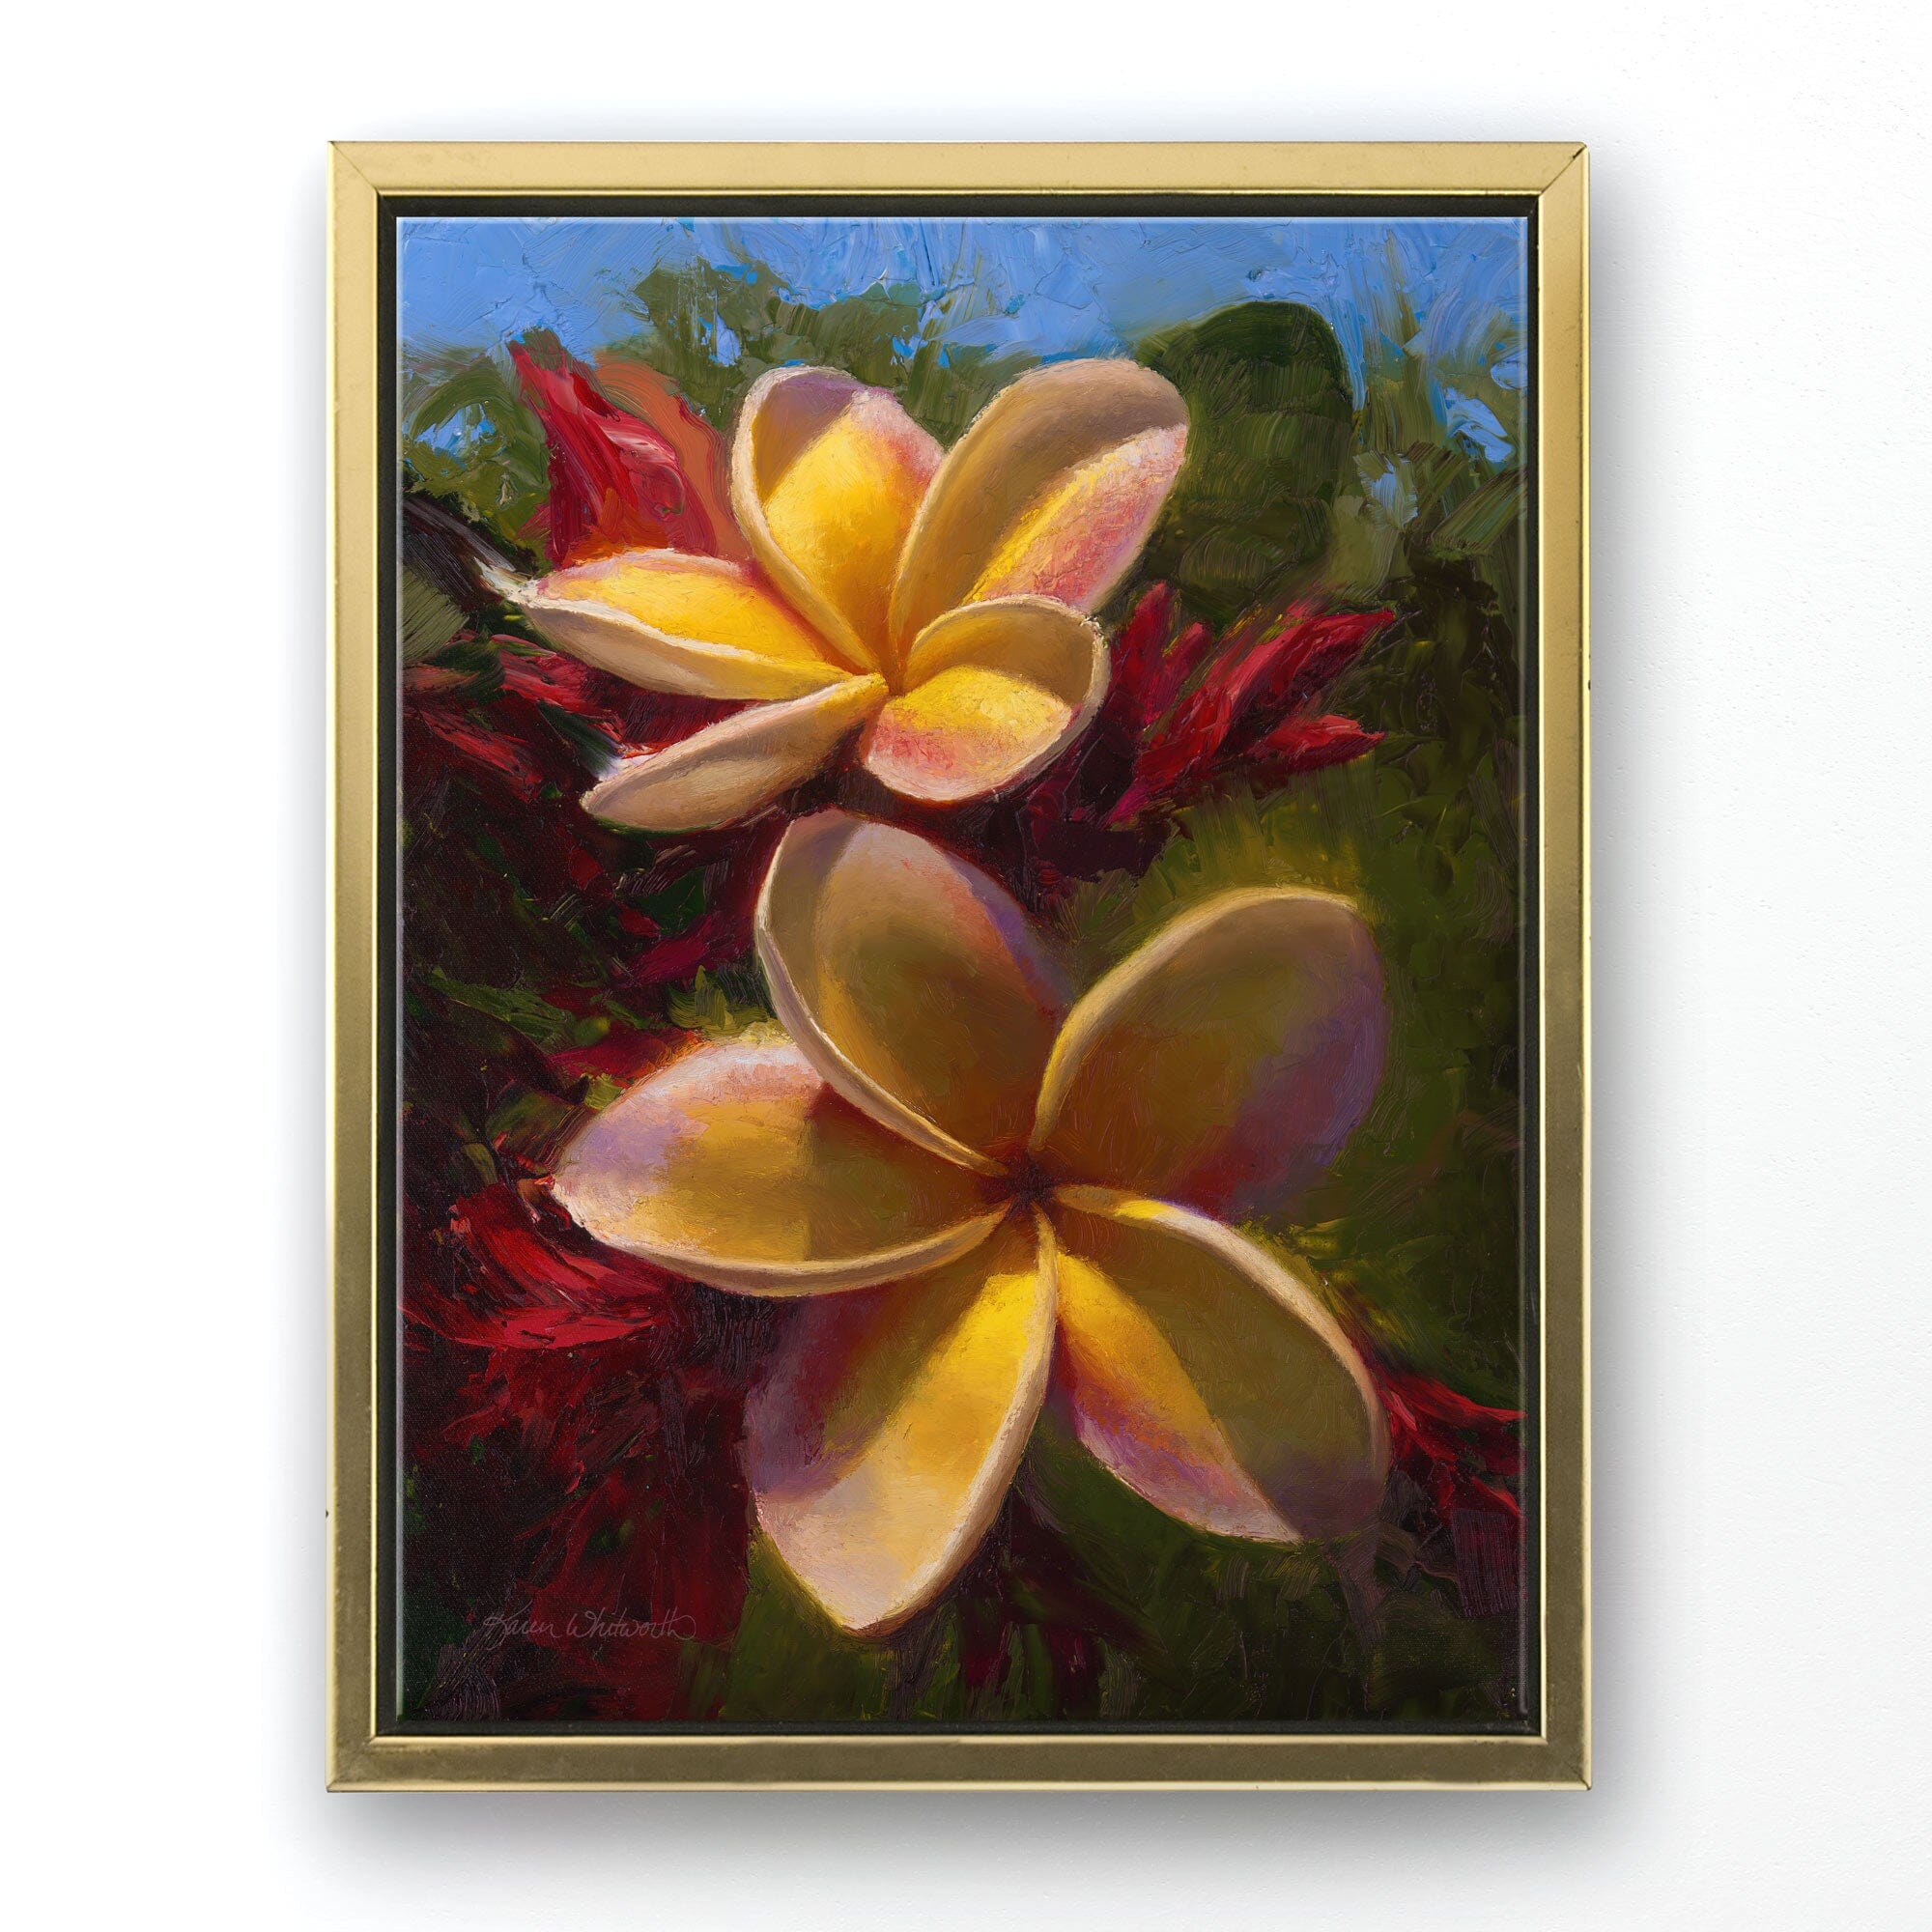 Hawaiian canvas art of tropical plumeria flowers in a floral painting by artist Karen Whitworth. The artwork is in a gold picture frame and hanging on a white wall. 